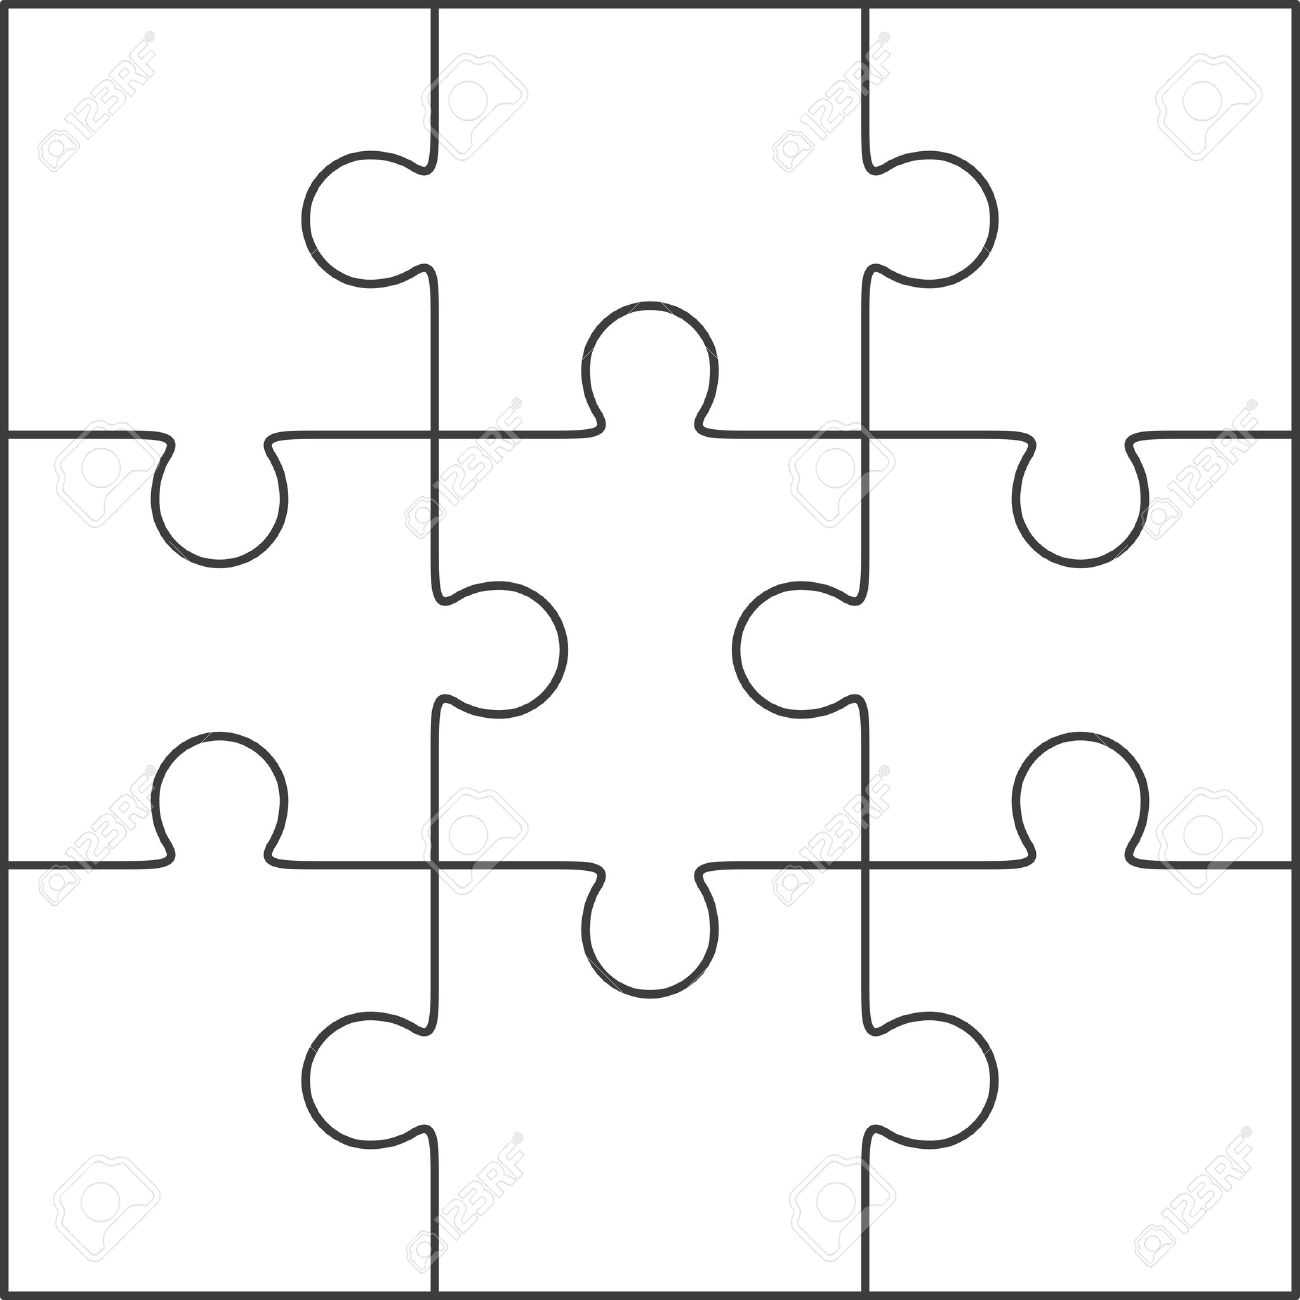 Jigsaw Puzzle Vector, Blank Simple Template 3X3 Throughout Blank Jigsaw Piece Template